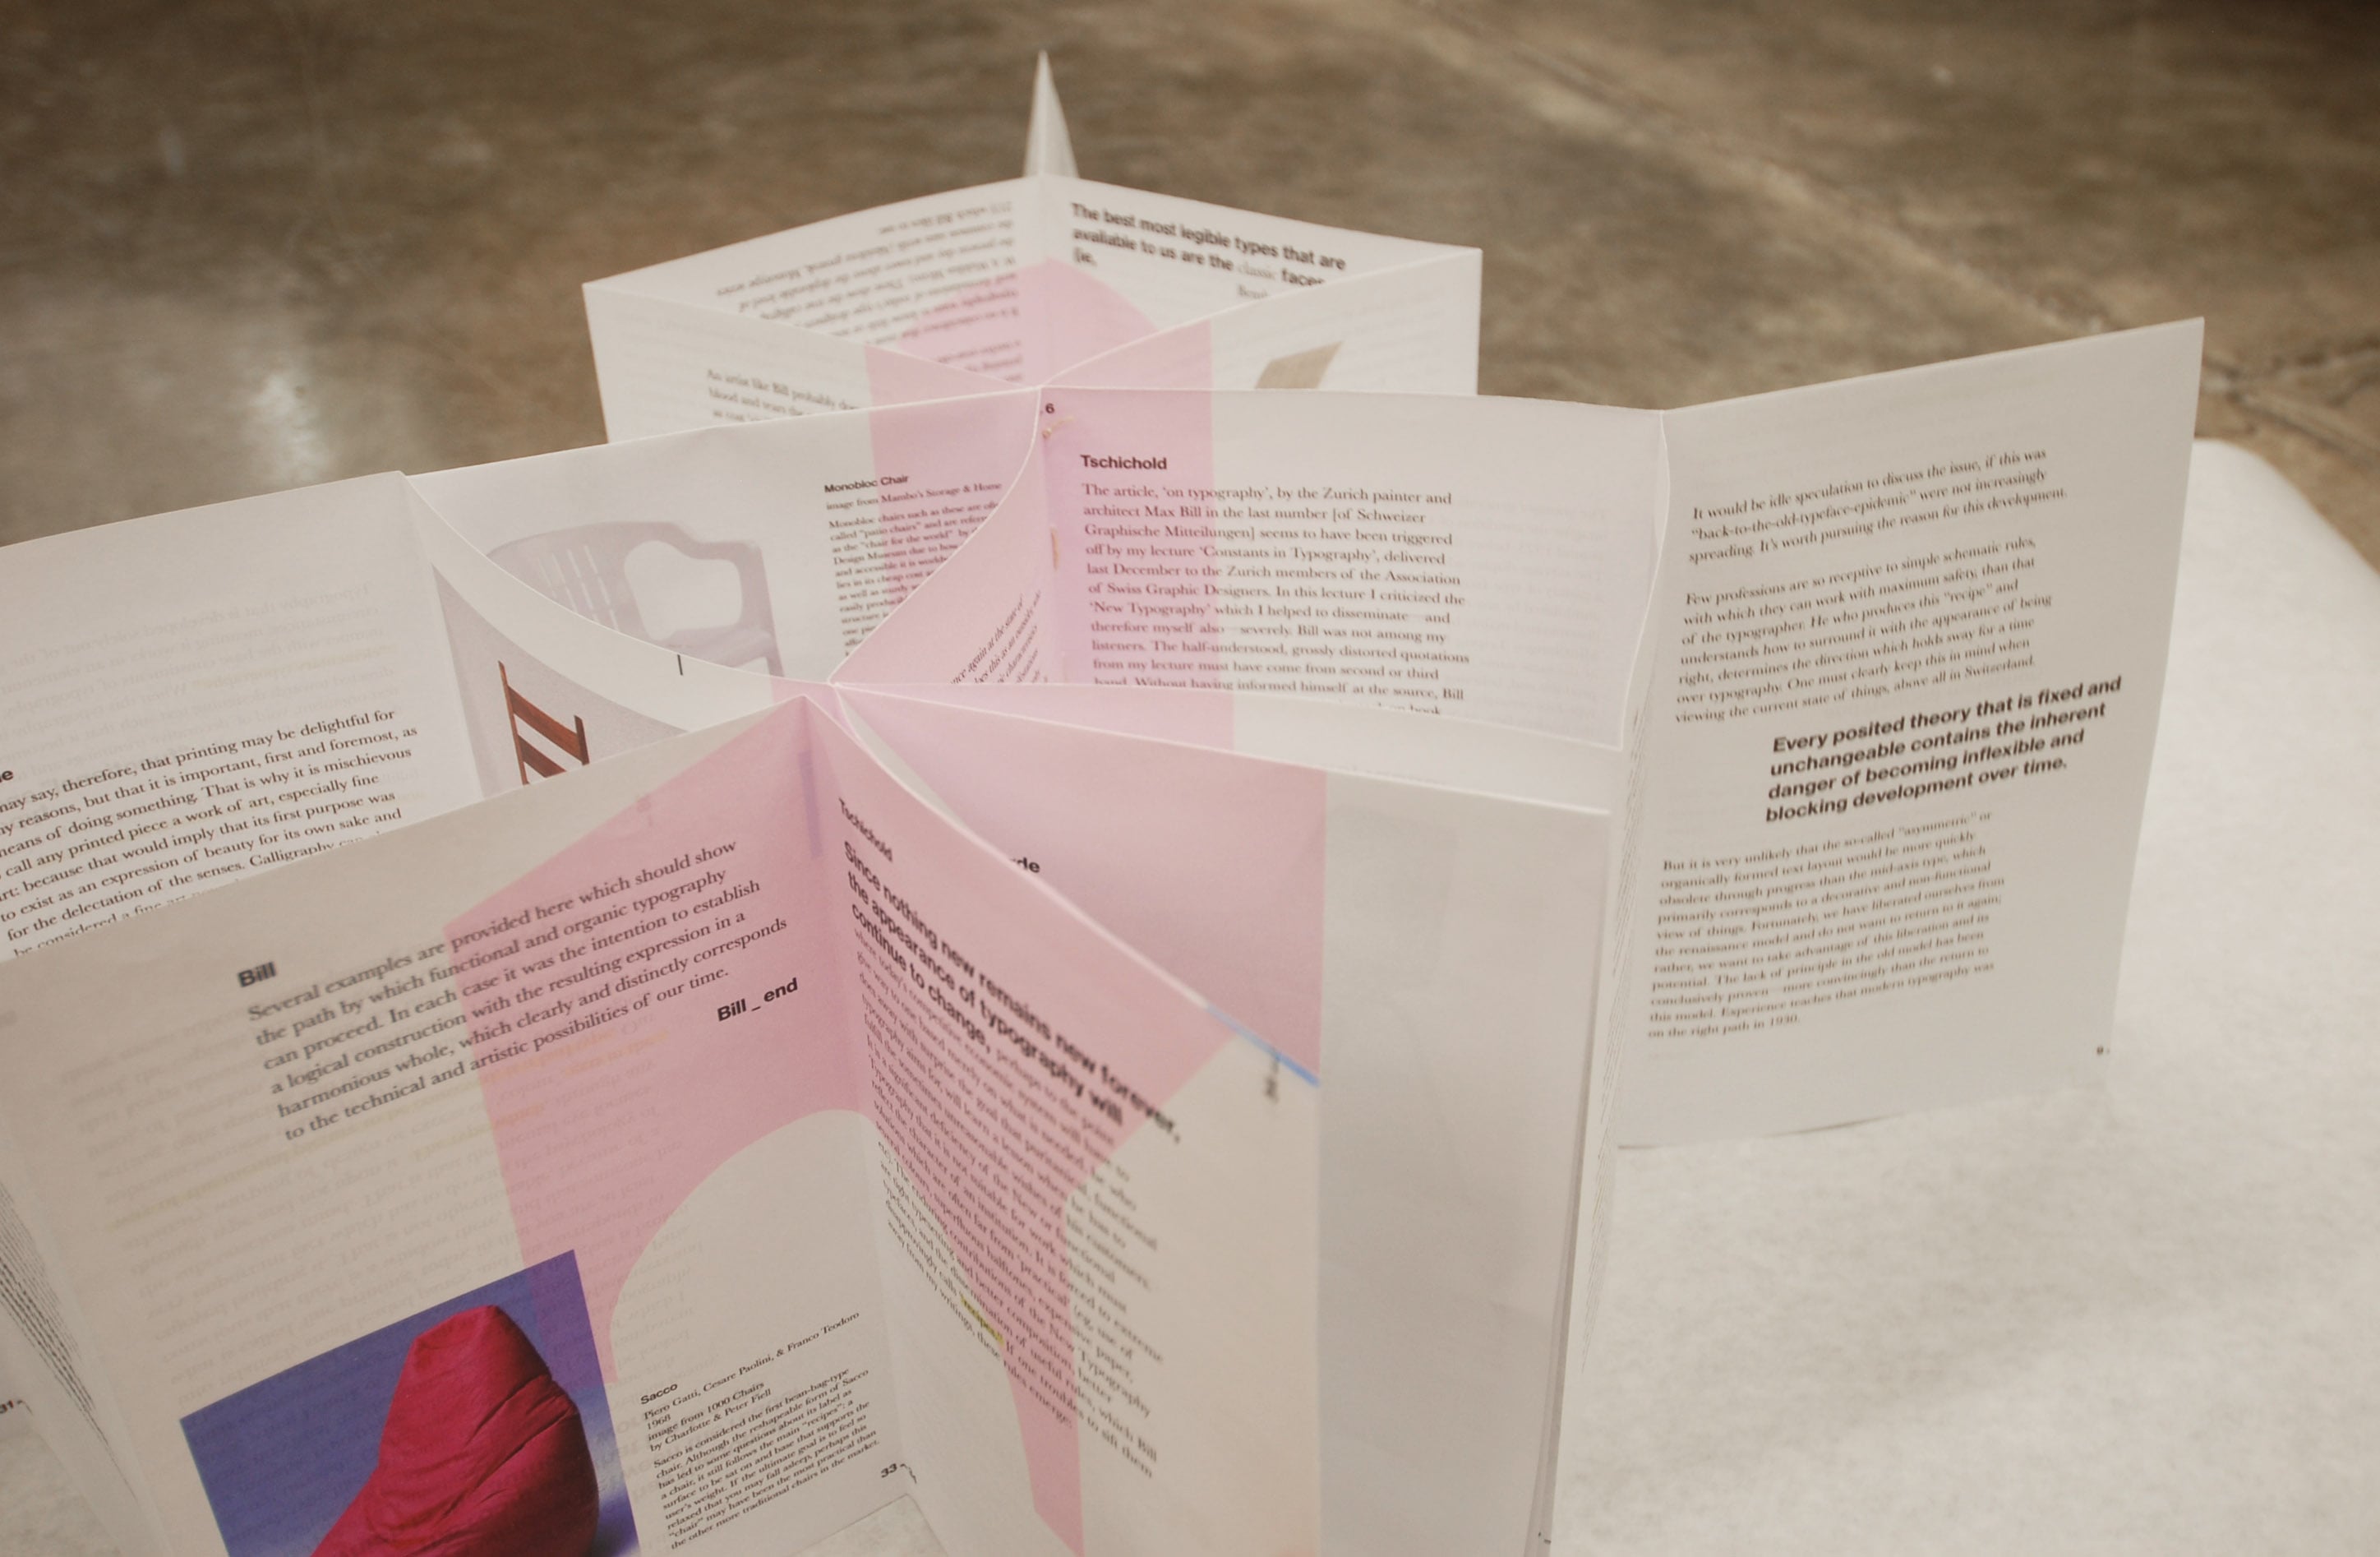 View of arranged booklet from above, showing the connection of shapes from the pages forming a silhouette of a chair.